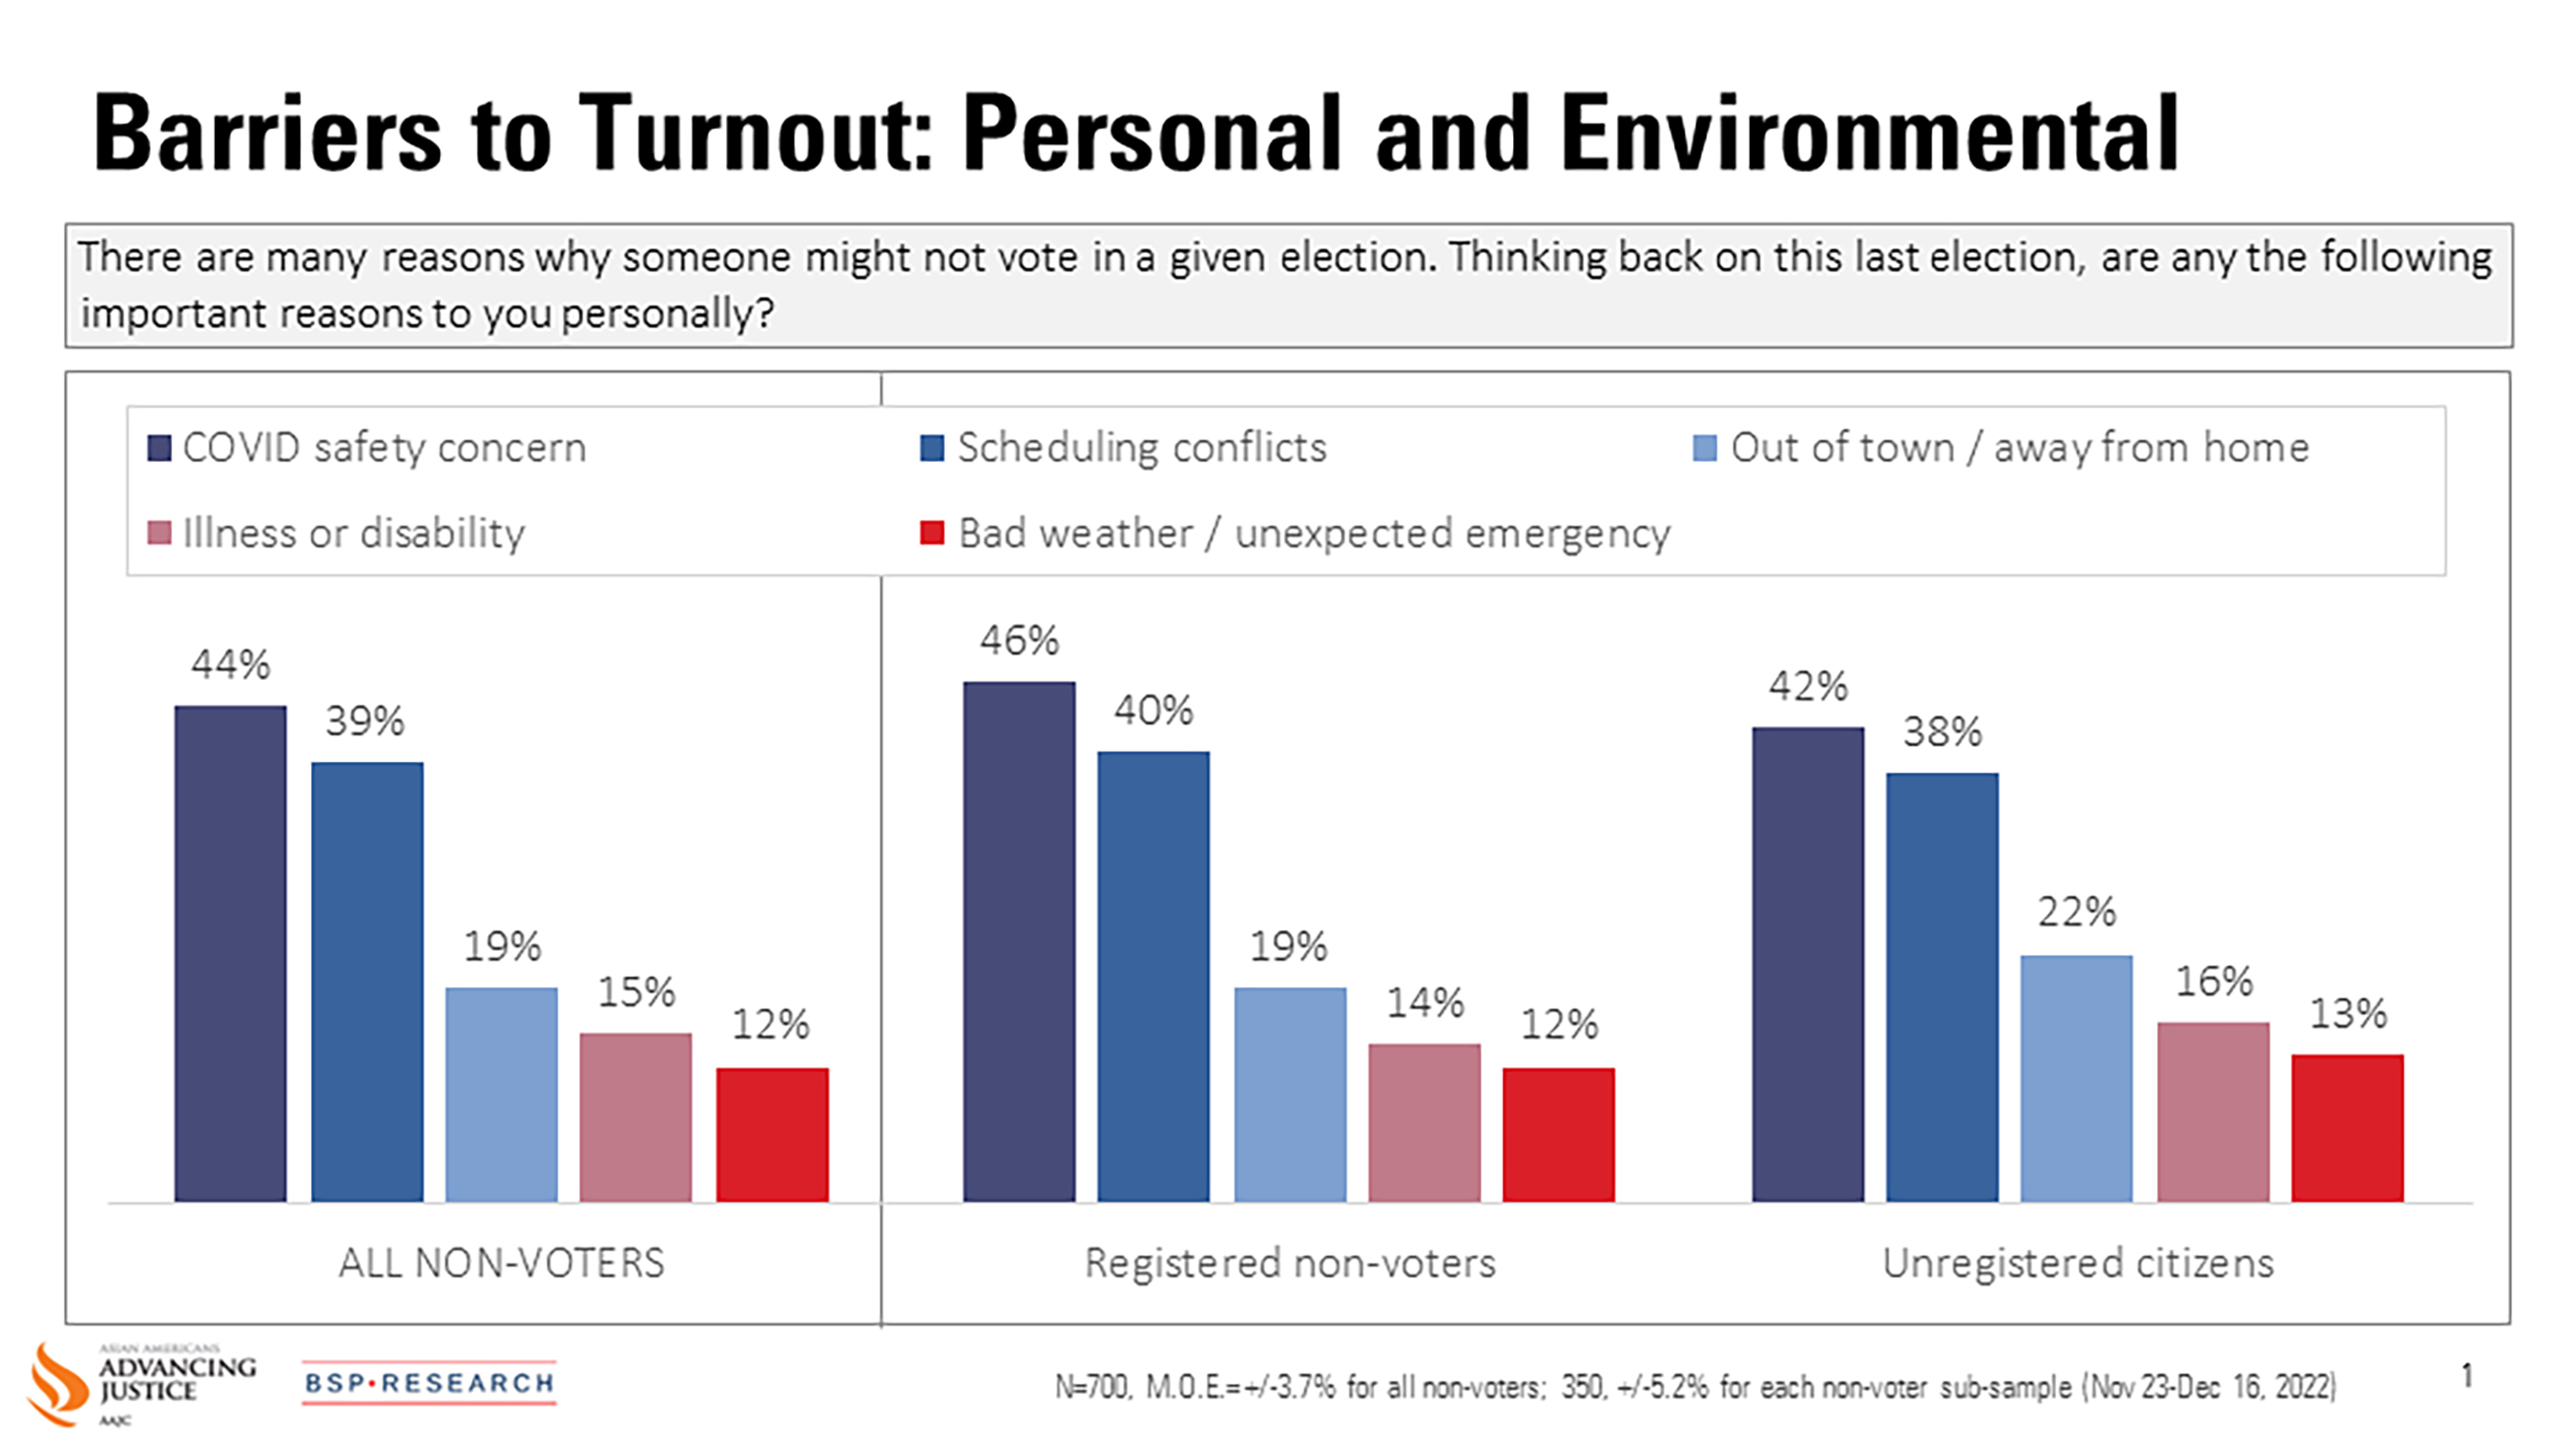 2022 National Poll Graphic Shows Asian American Non-Voters Citing COVID/Scheduling Concerns as Reason for Not Voting